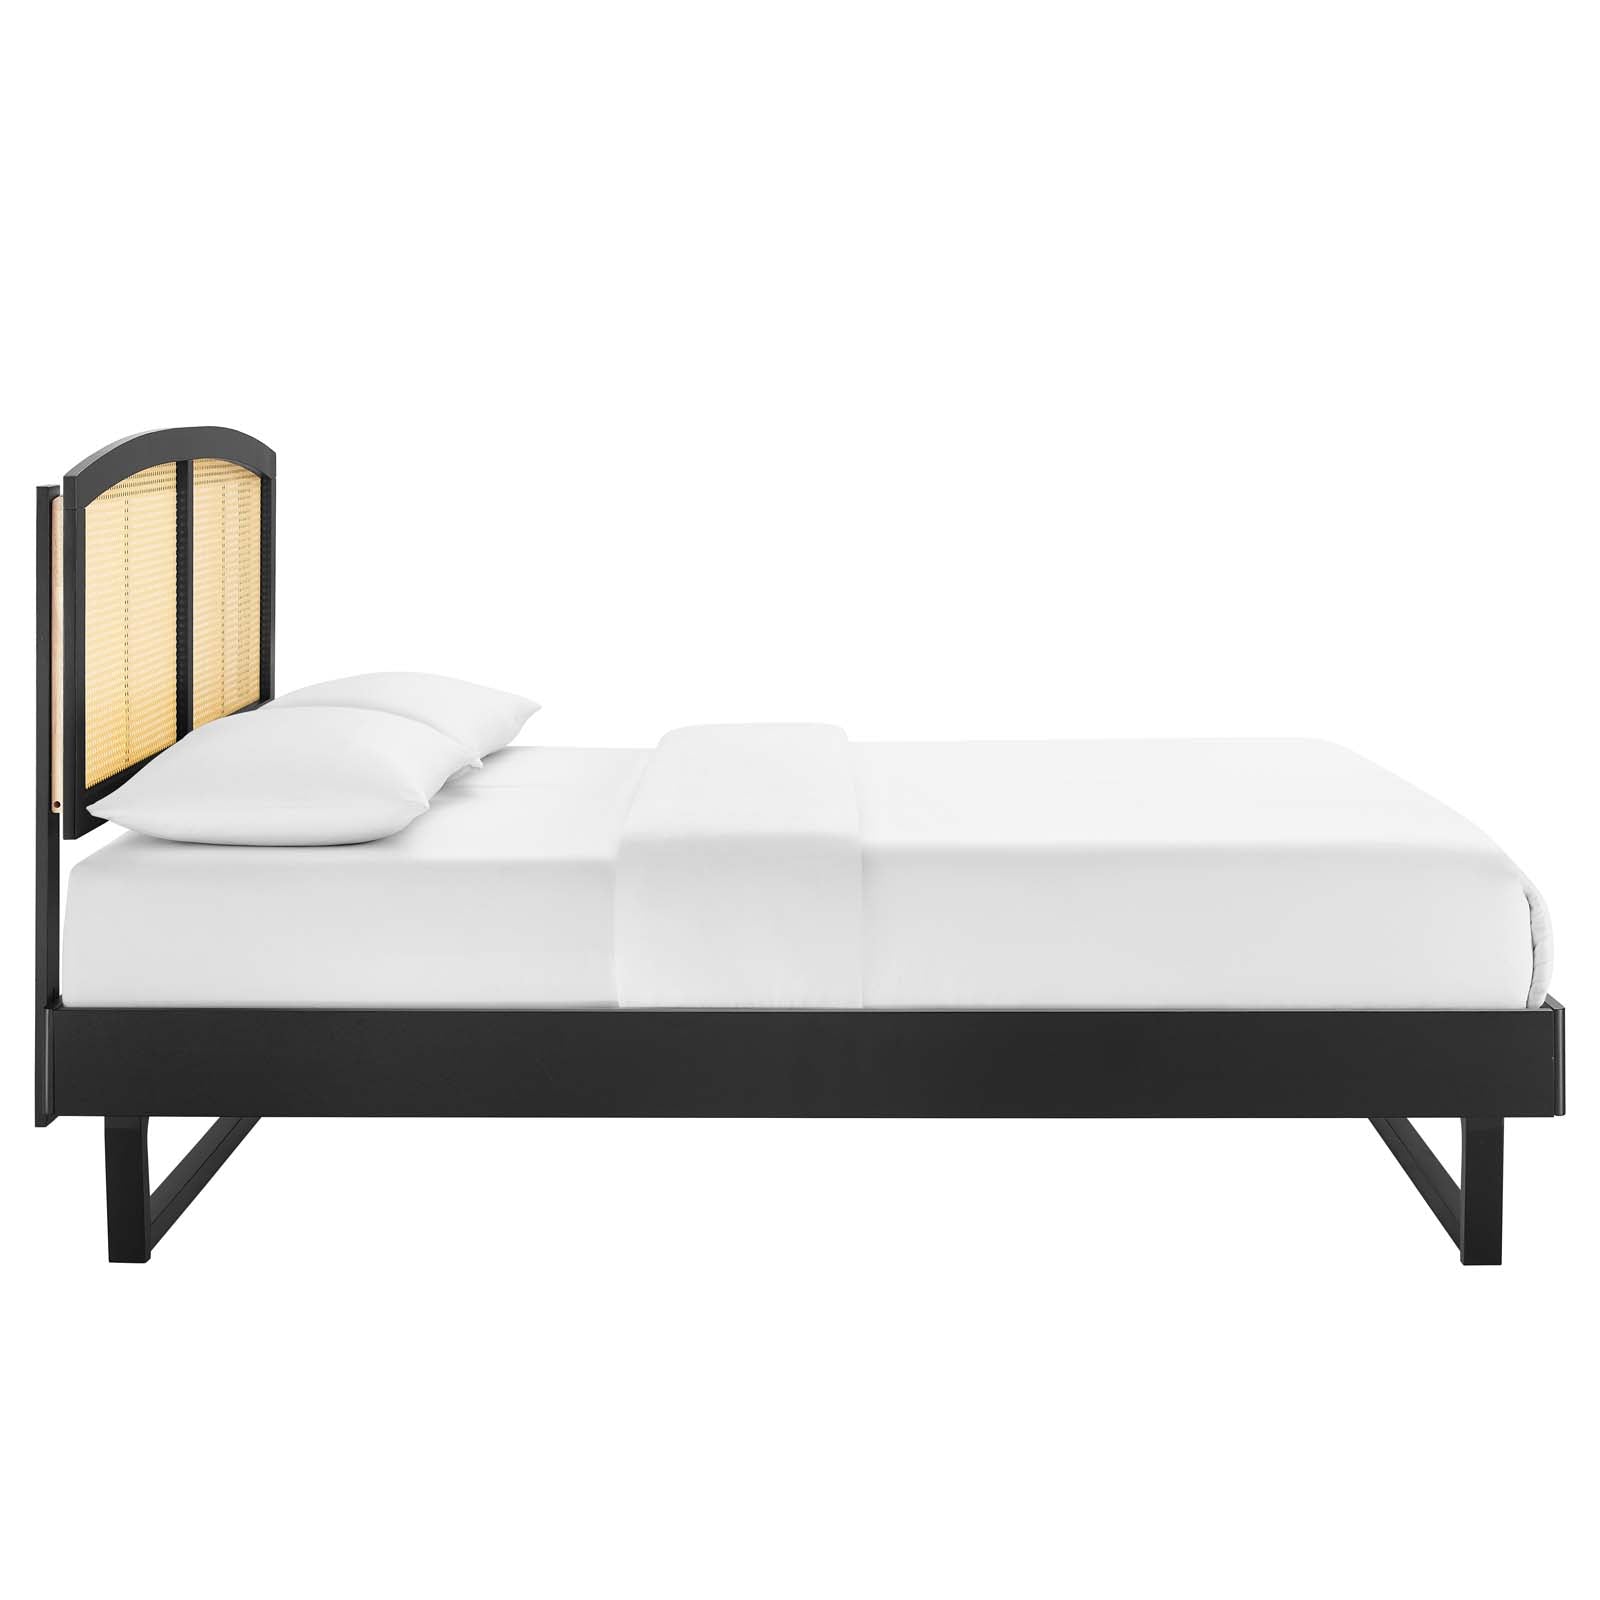 Colmar Cane and Wood Platform Bed With Angular Legs - Elite Maison